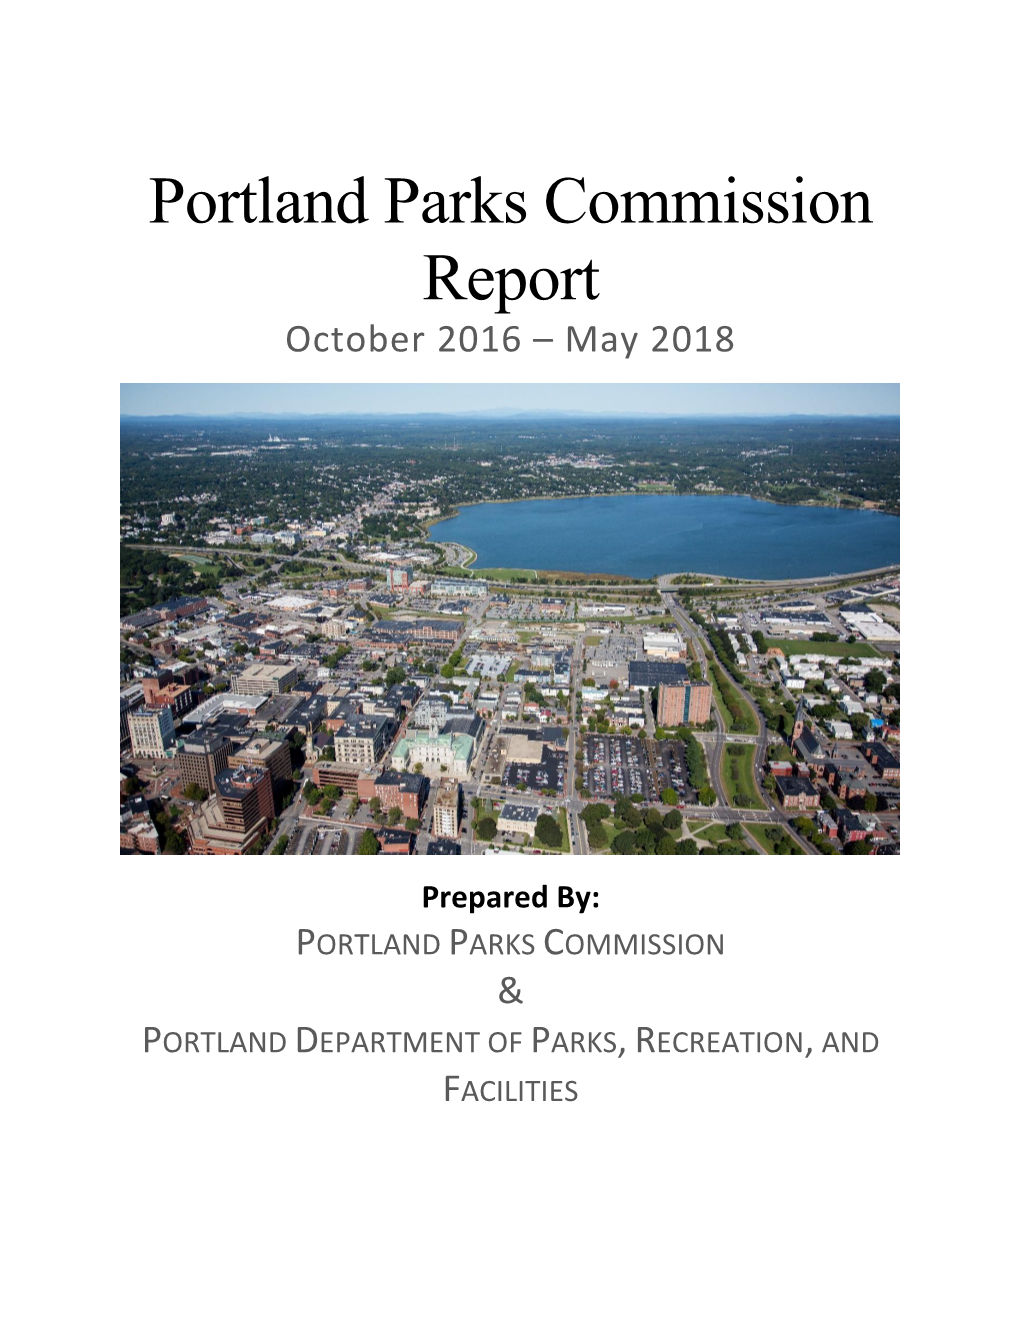 Portland Parks Commission Report October 2016 – May 2018